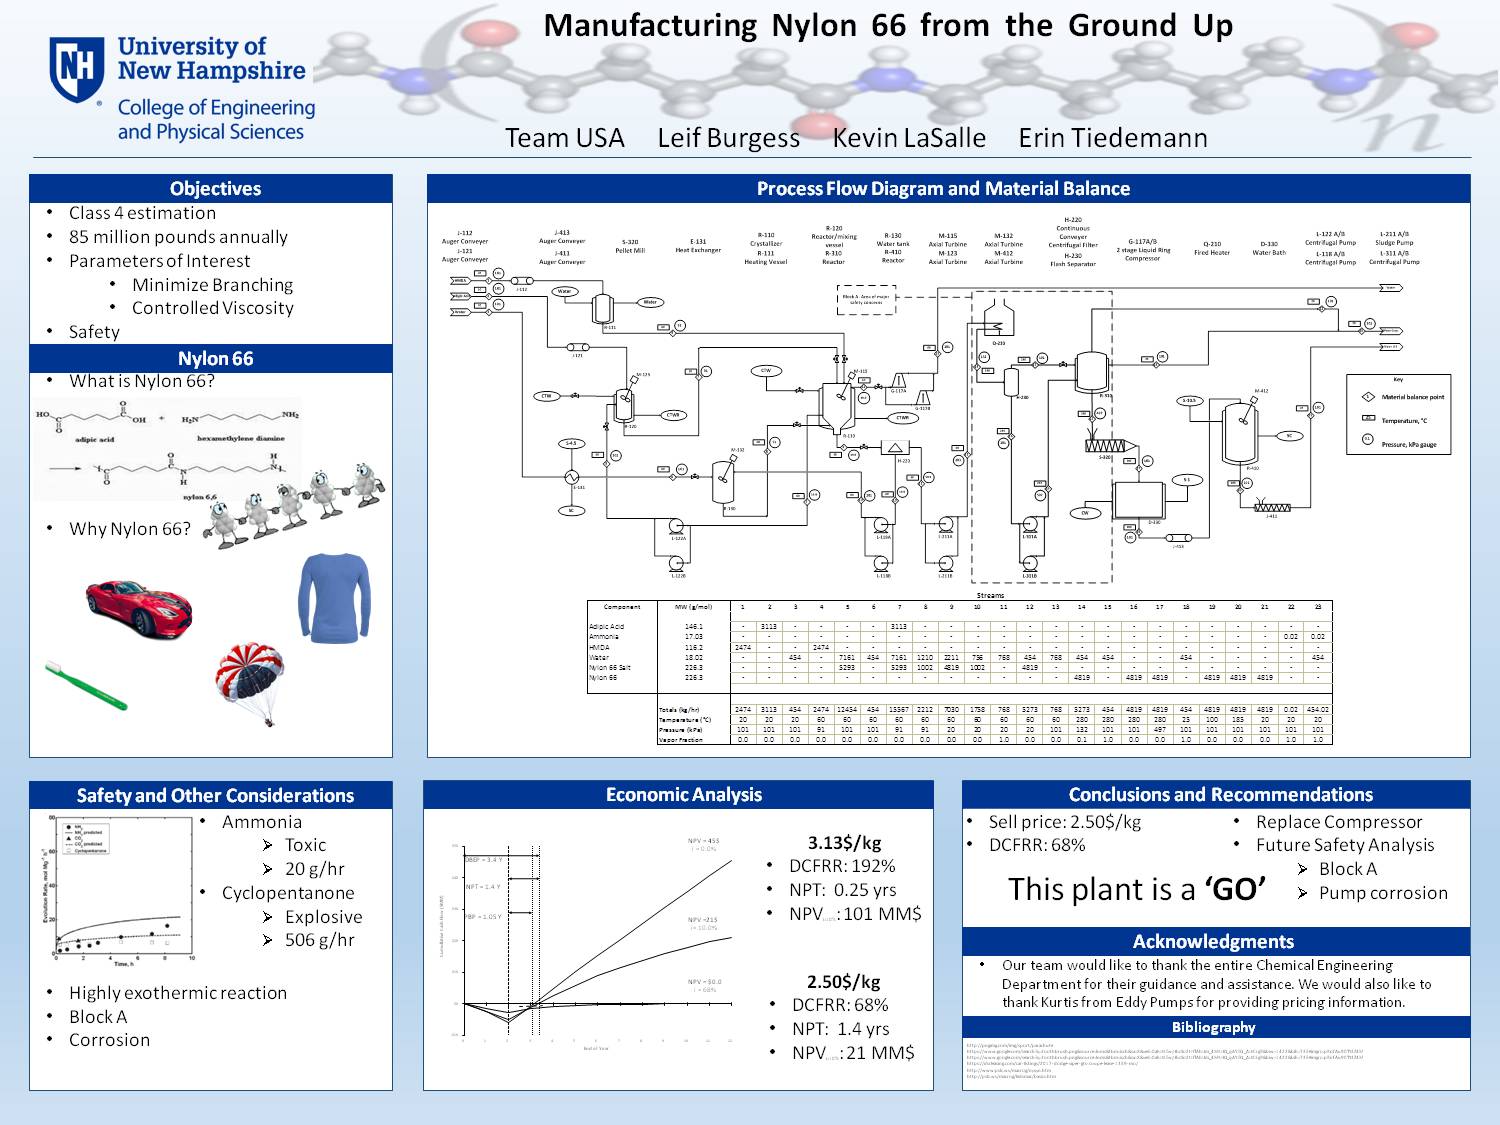 Manufacturing Nylon 66 From The Ground Up by lev86